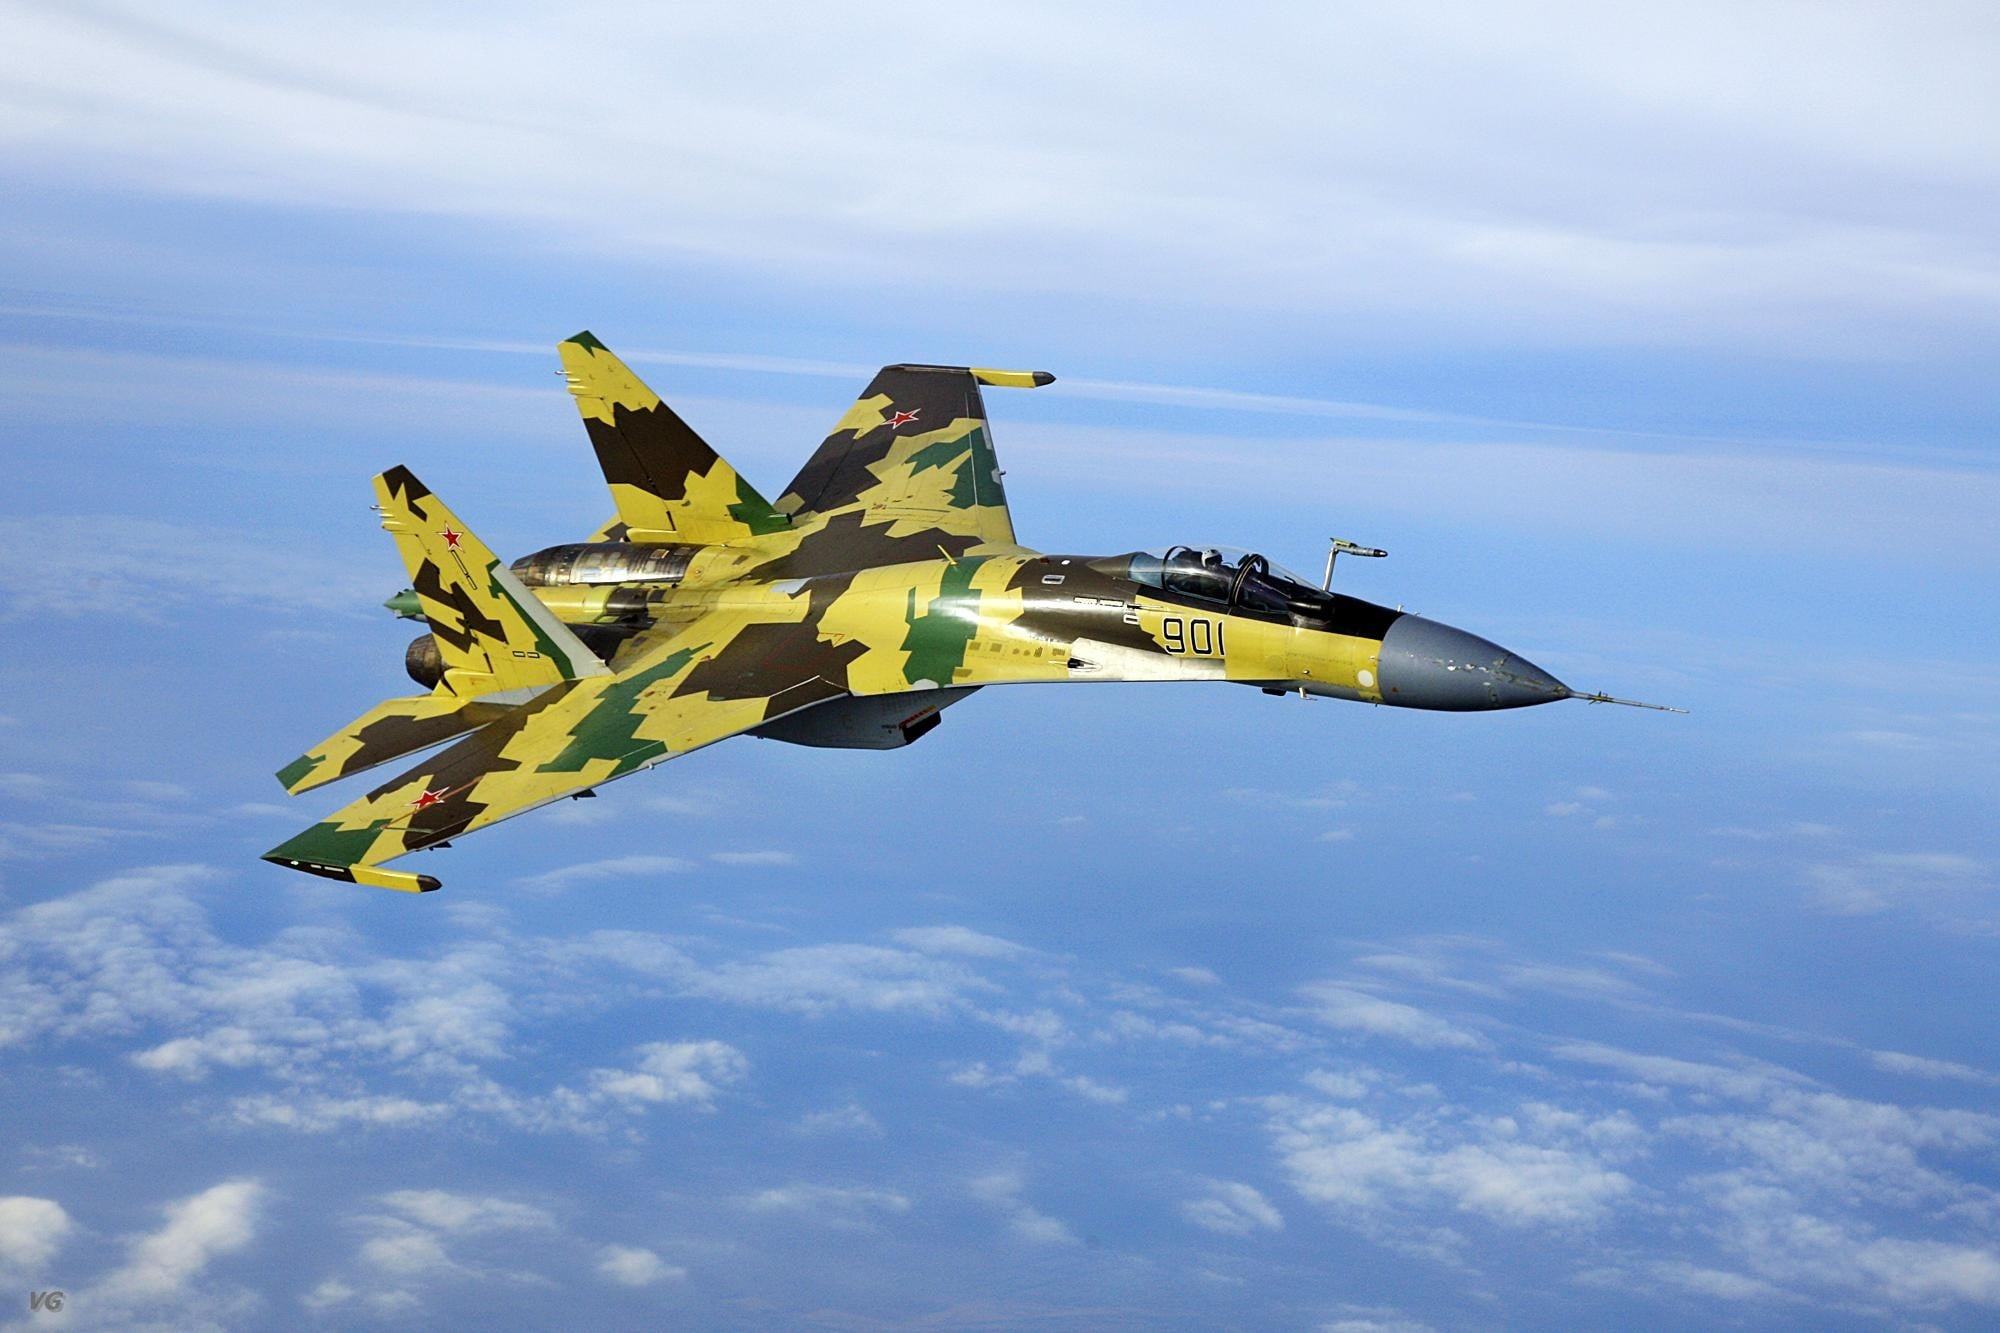 brown, yellow, and green camouflage fighter jet, military, military aircraft, Sukhoi Su-35, aircraft